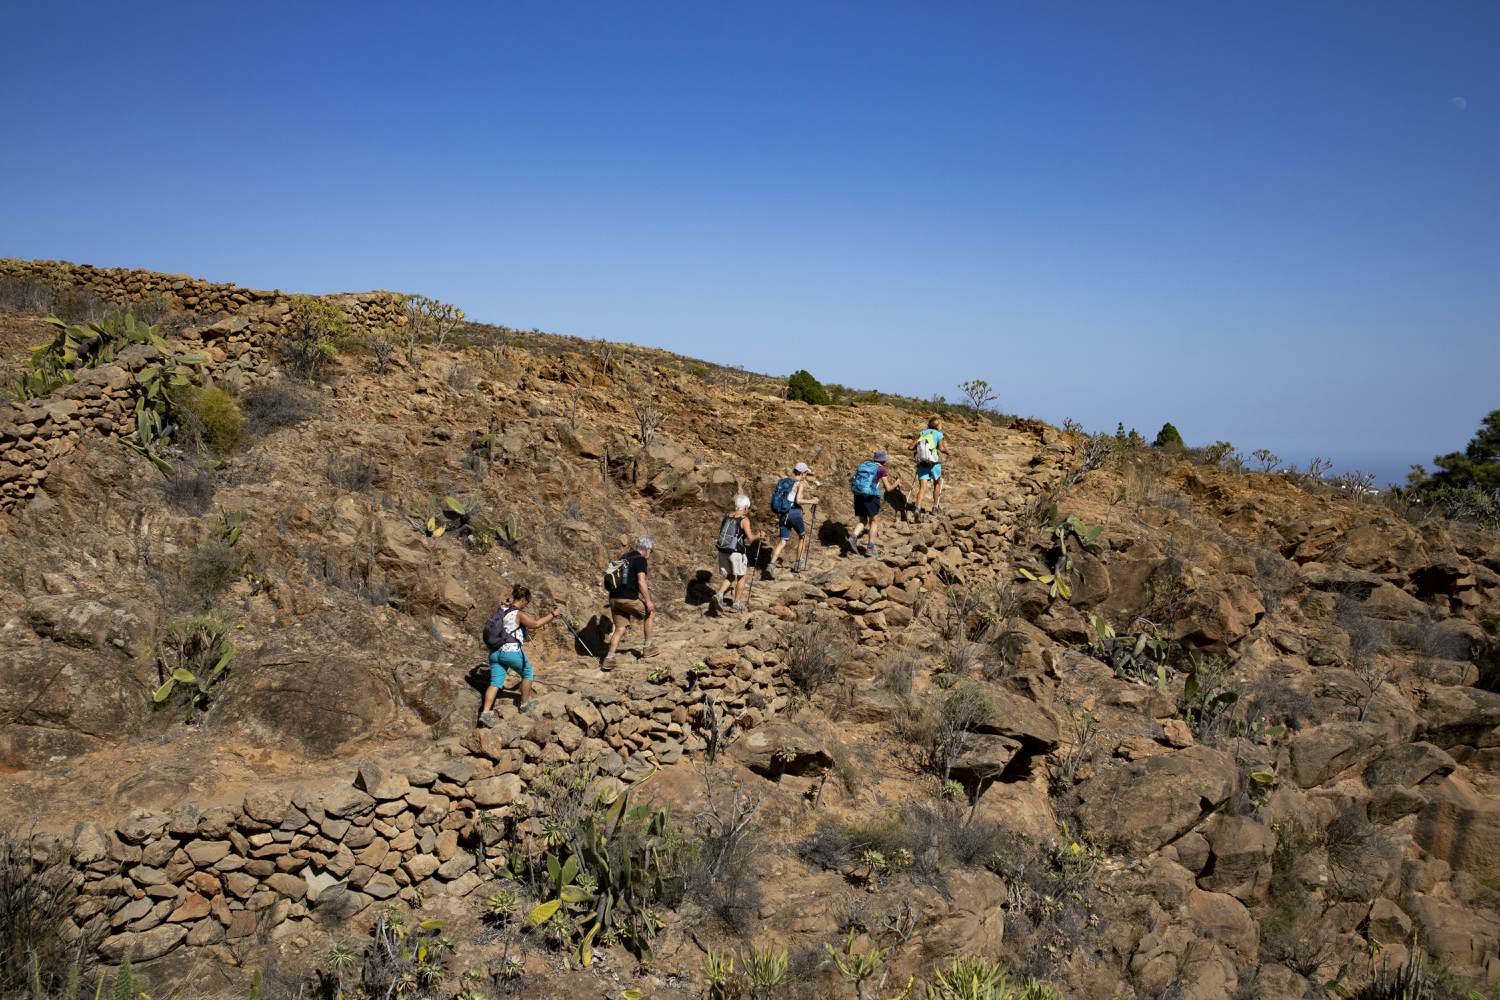 Ascent in the Barranco